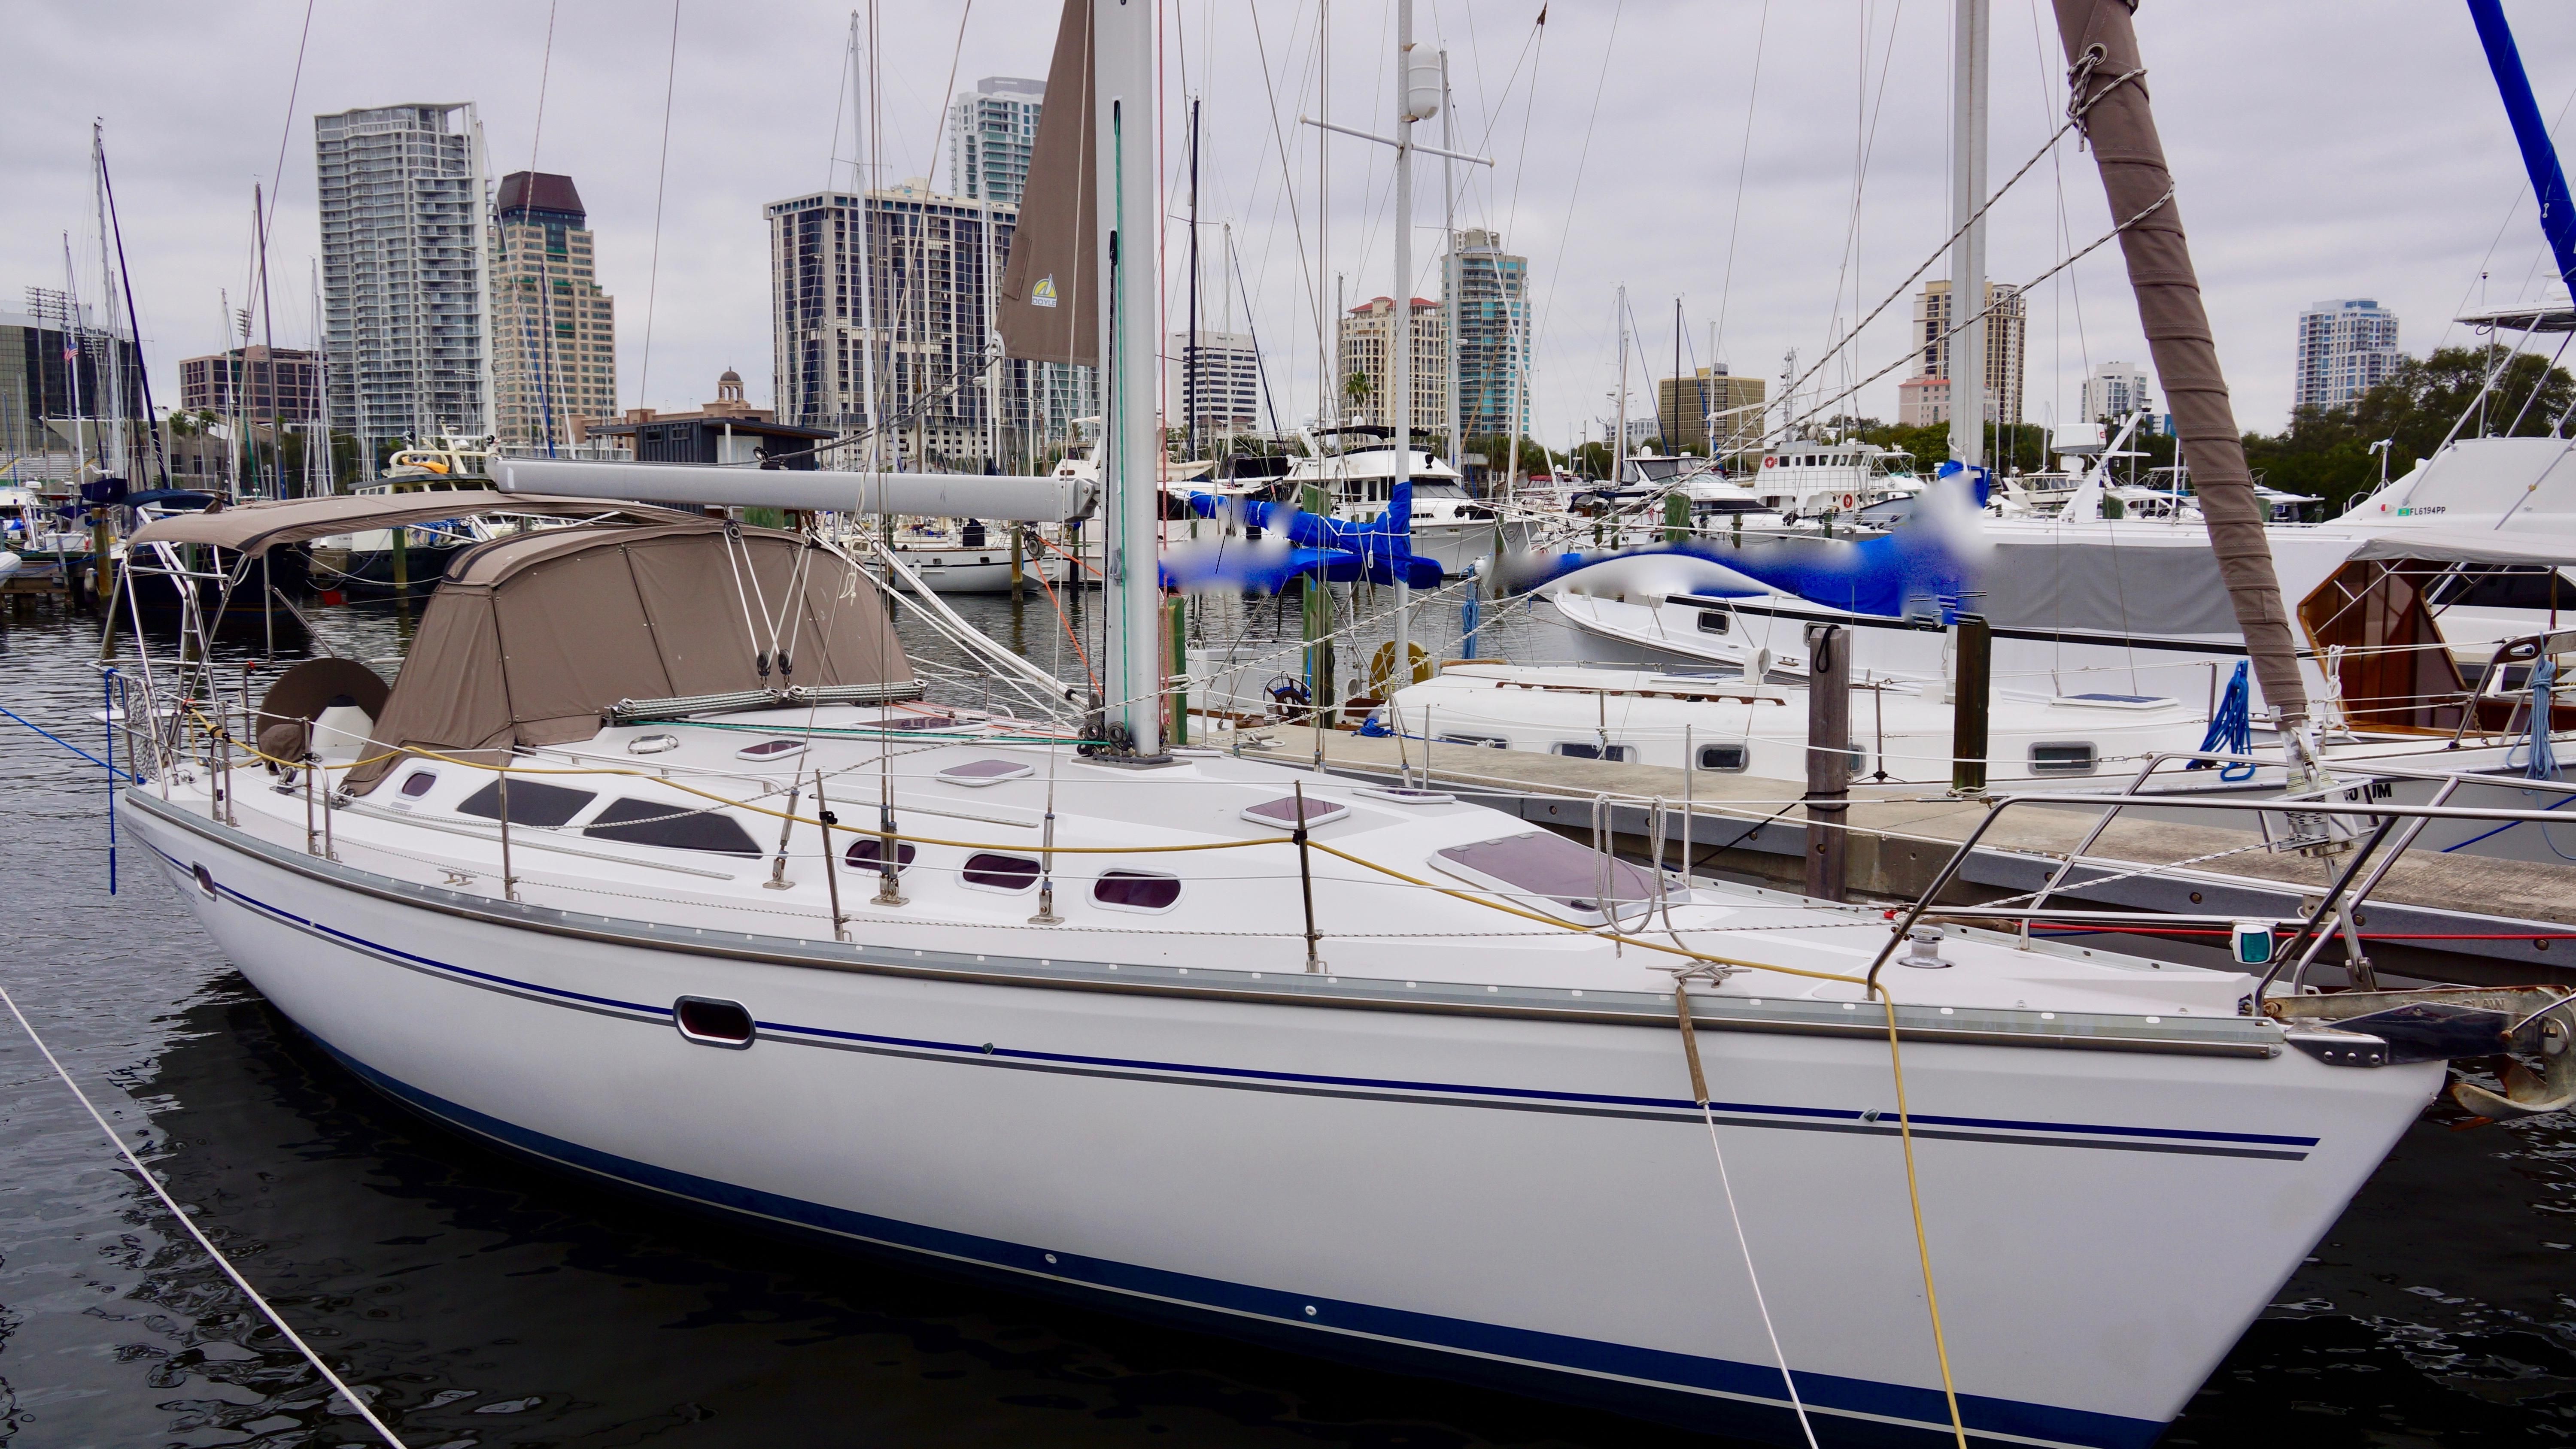 1995 Catalina 400 Sloop for sale - YachtWorld